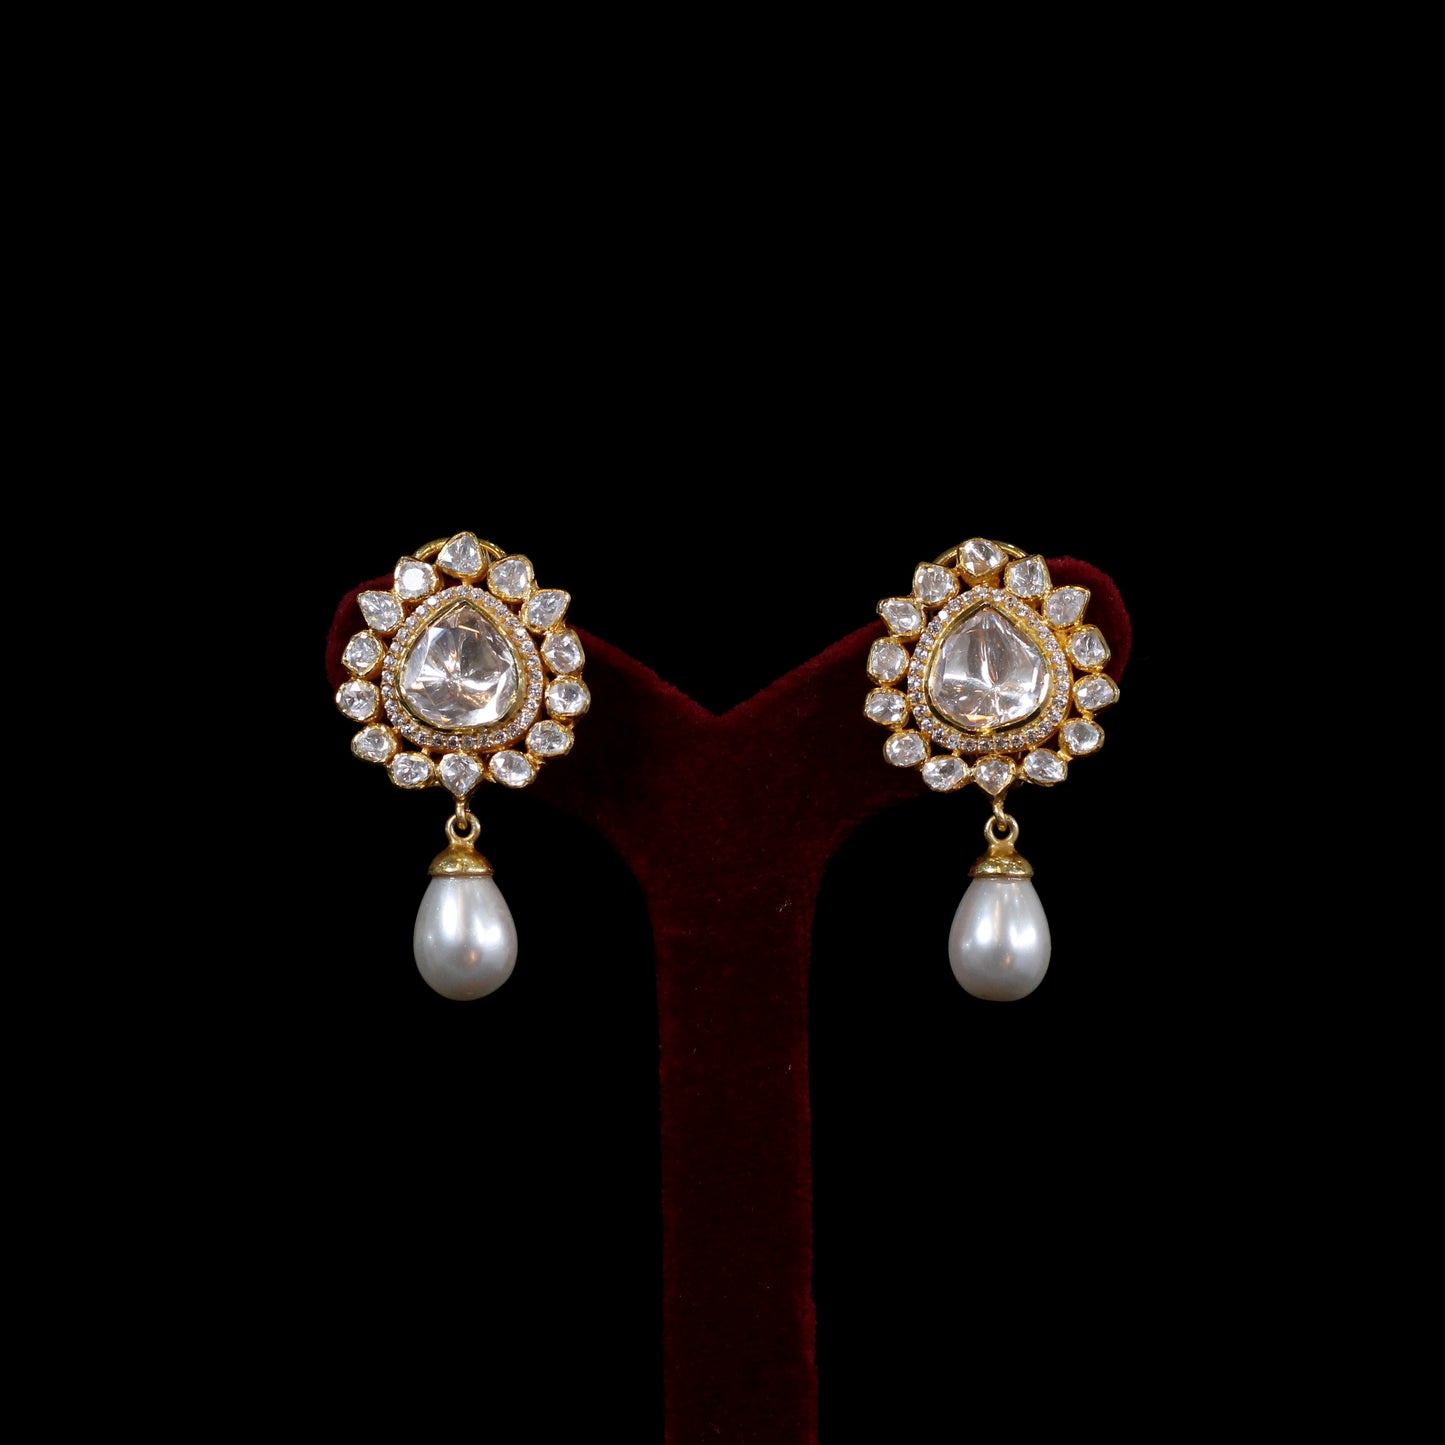 EARRINGS- 92.5 STERLING SILVER GOLD PLATED WITH KUNDAN AND PEARLS.